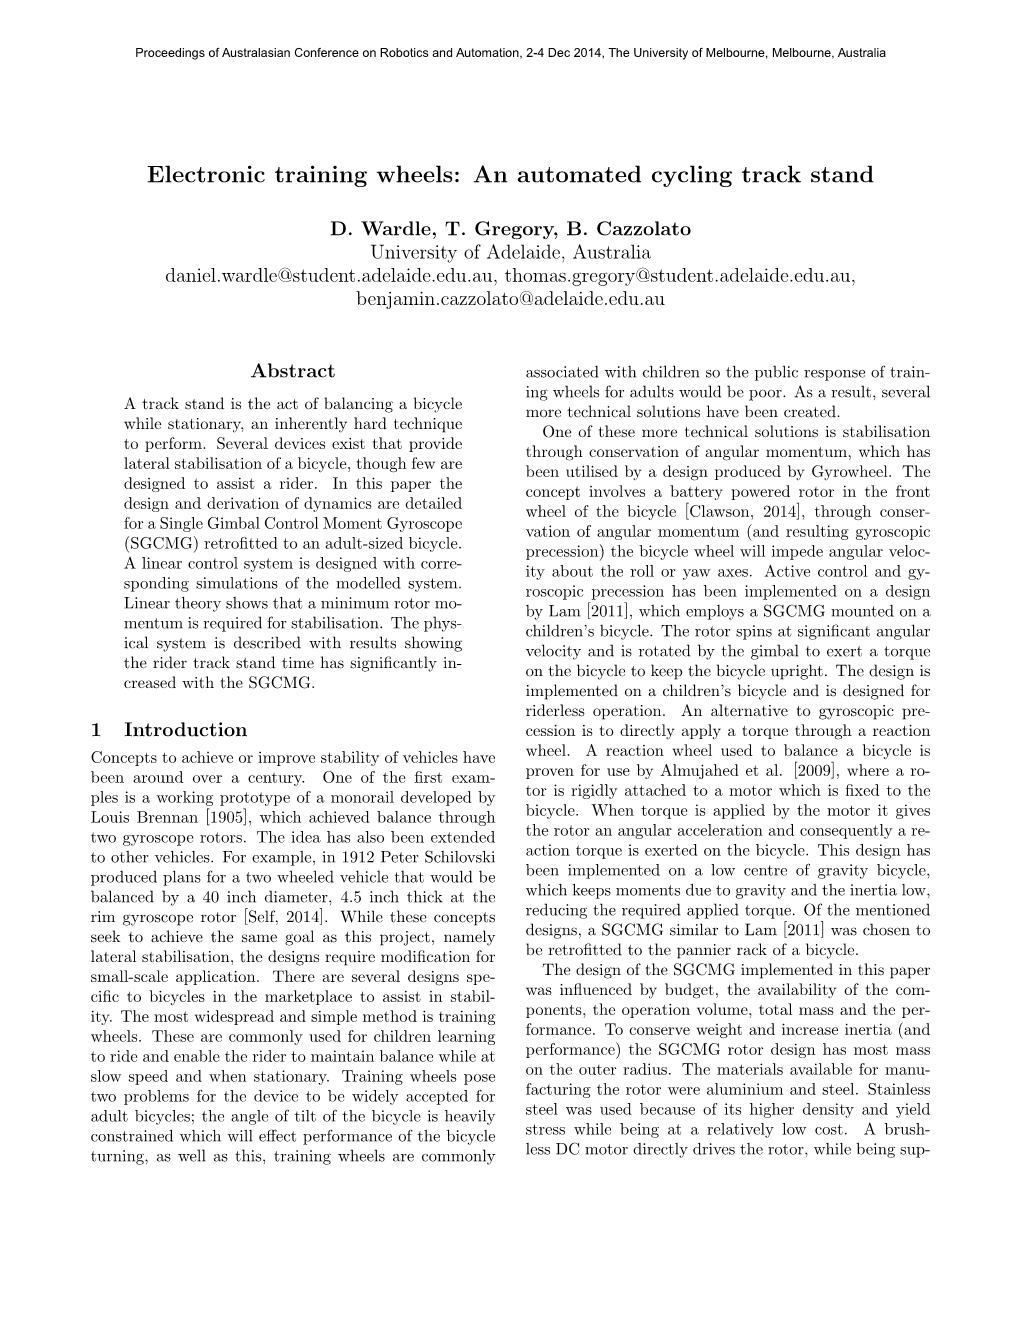 Electronic Training Wheels: an Automated Cycling Track Stand